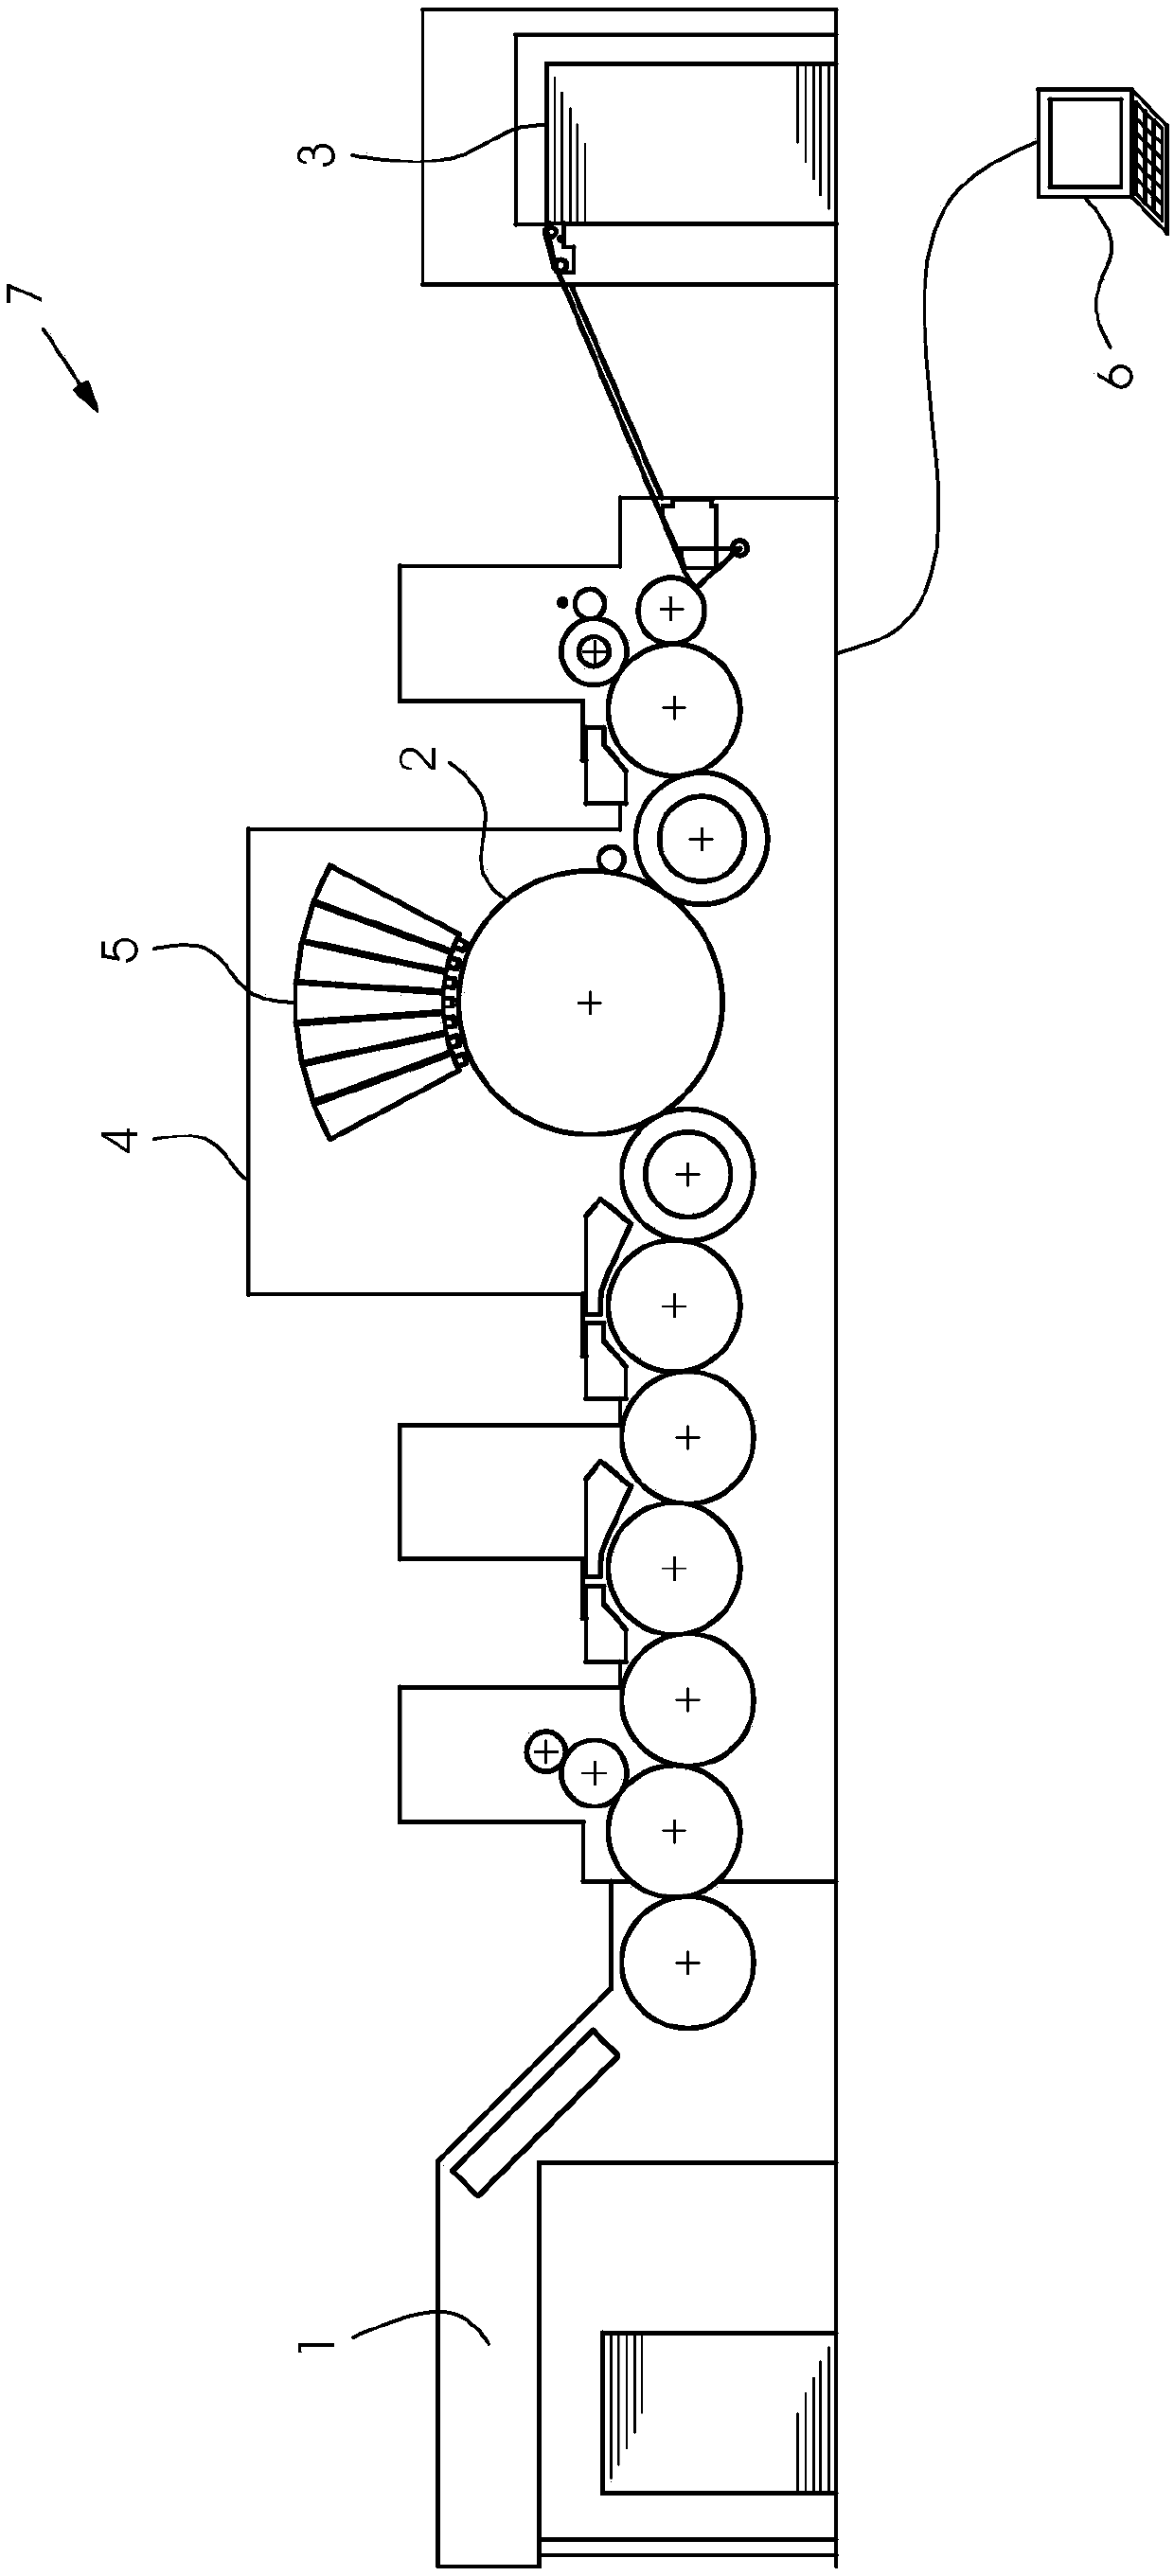 Method for the automated calibration of a printing machine